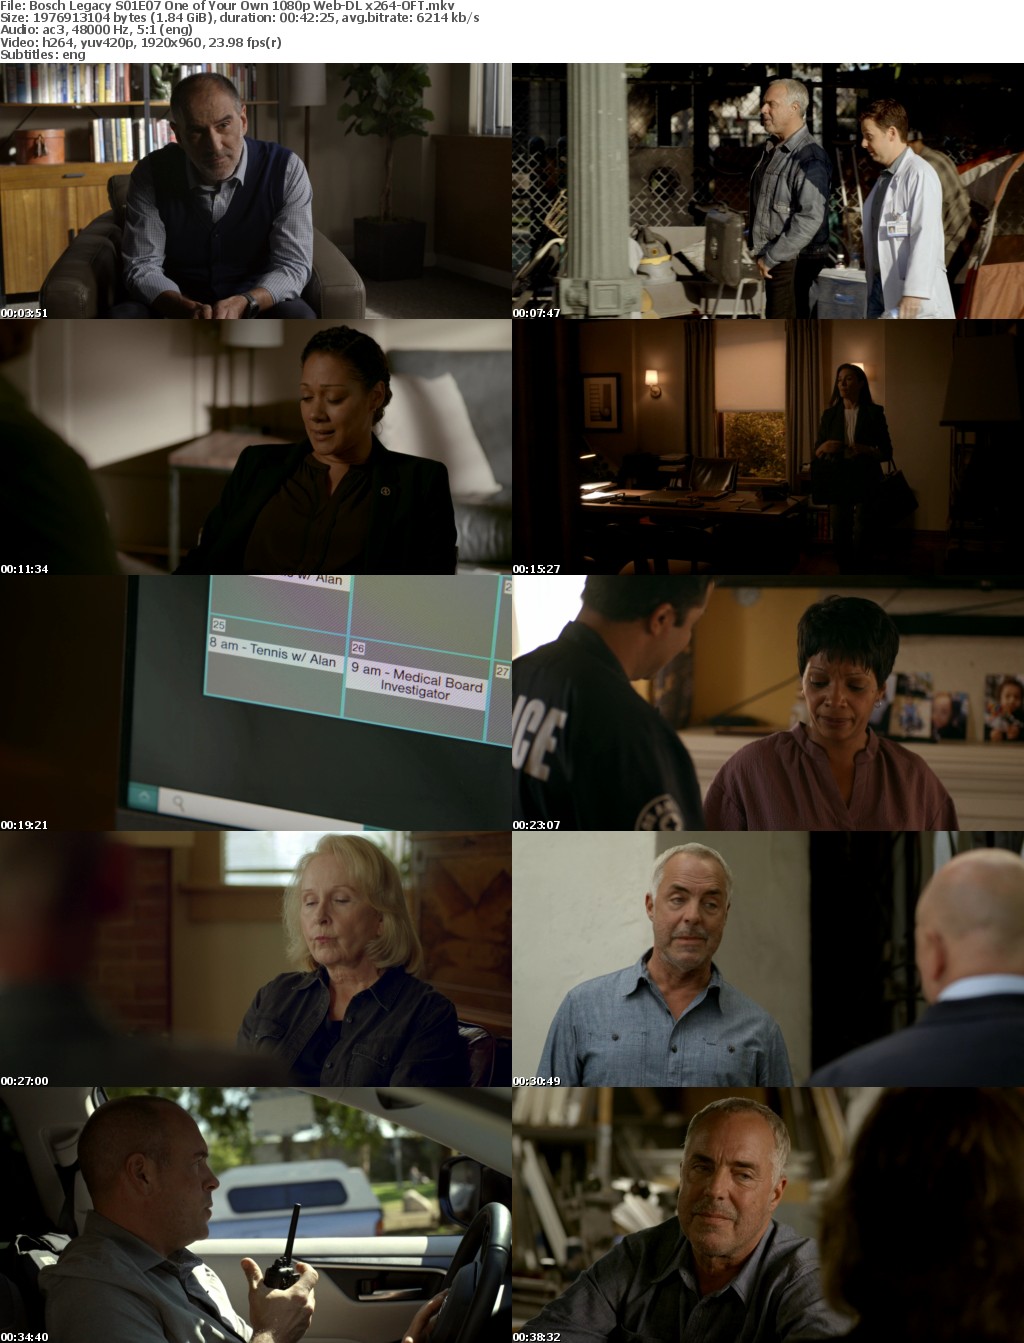 Bosch Legacy S01E07 One of Your Own 1080p Web-DL x264-OFT